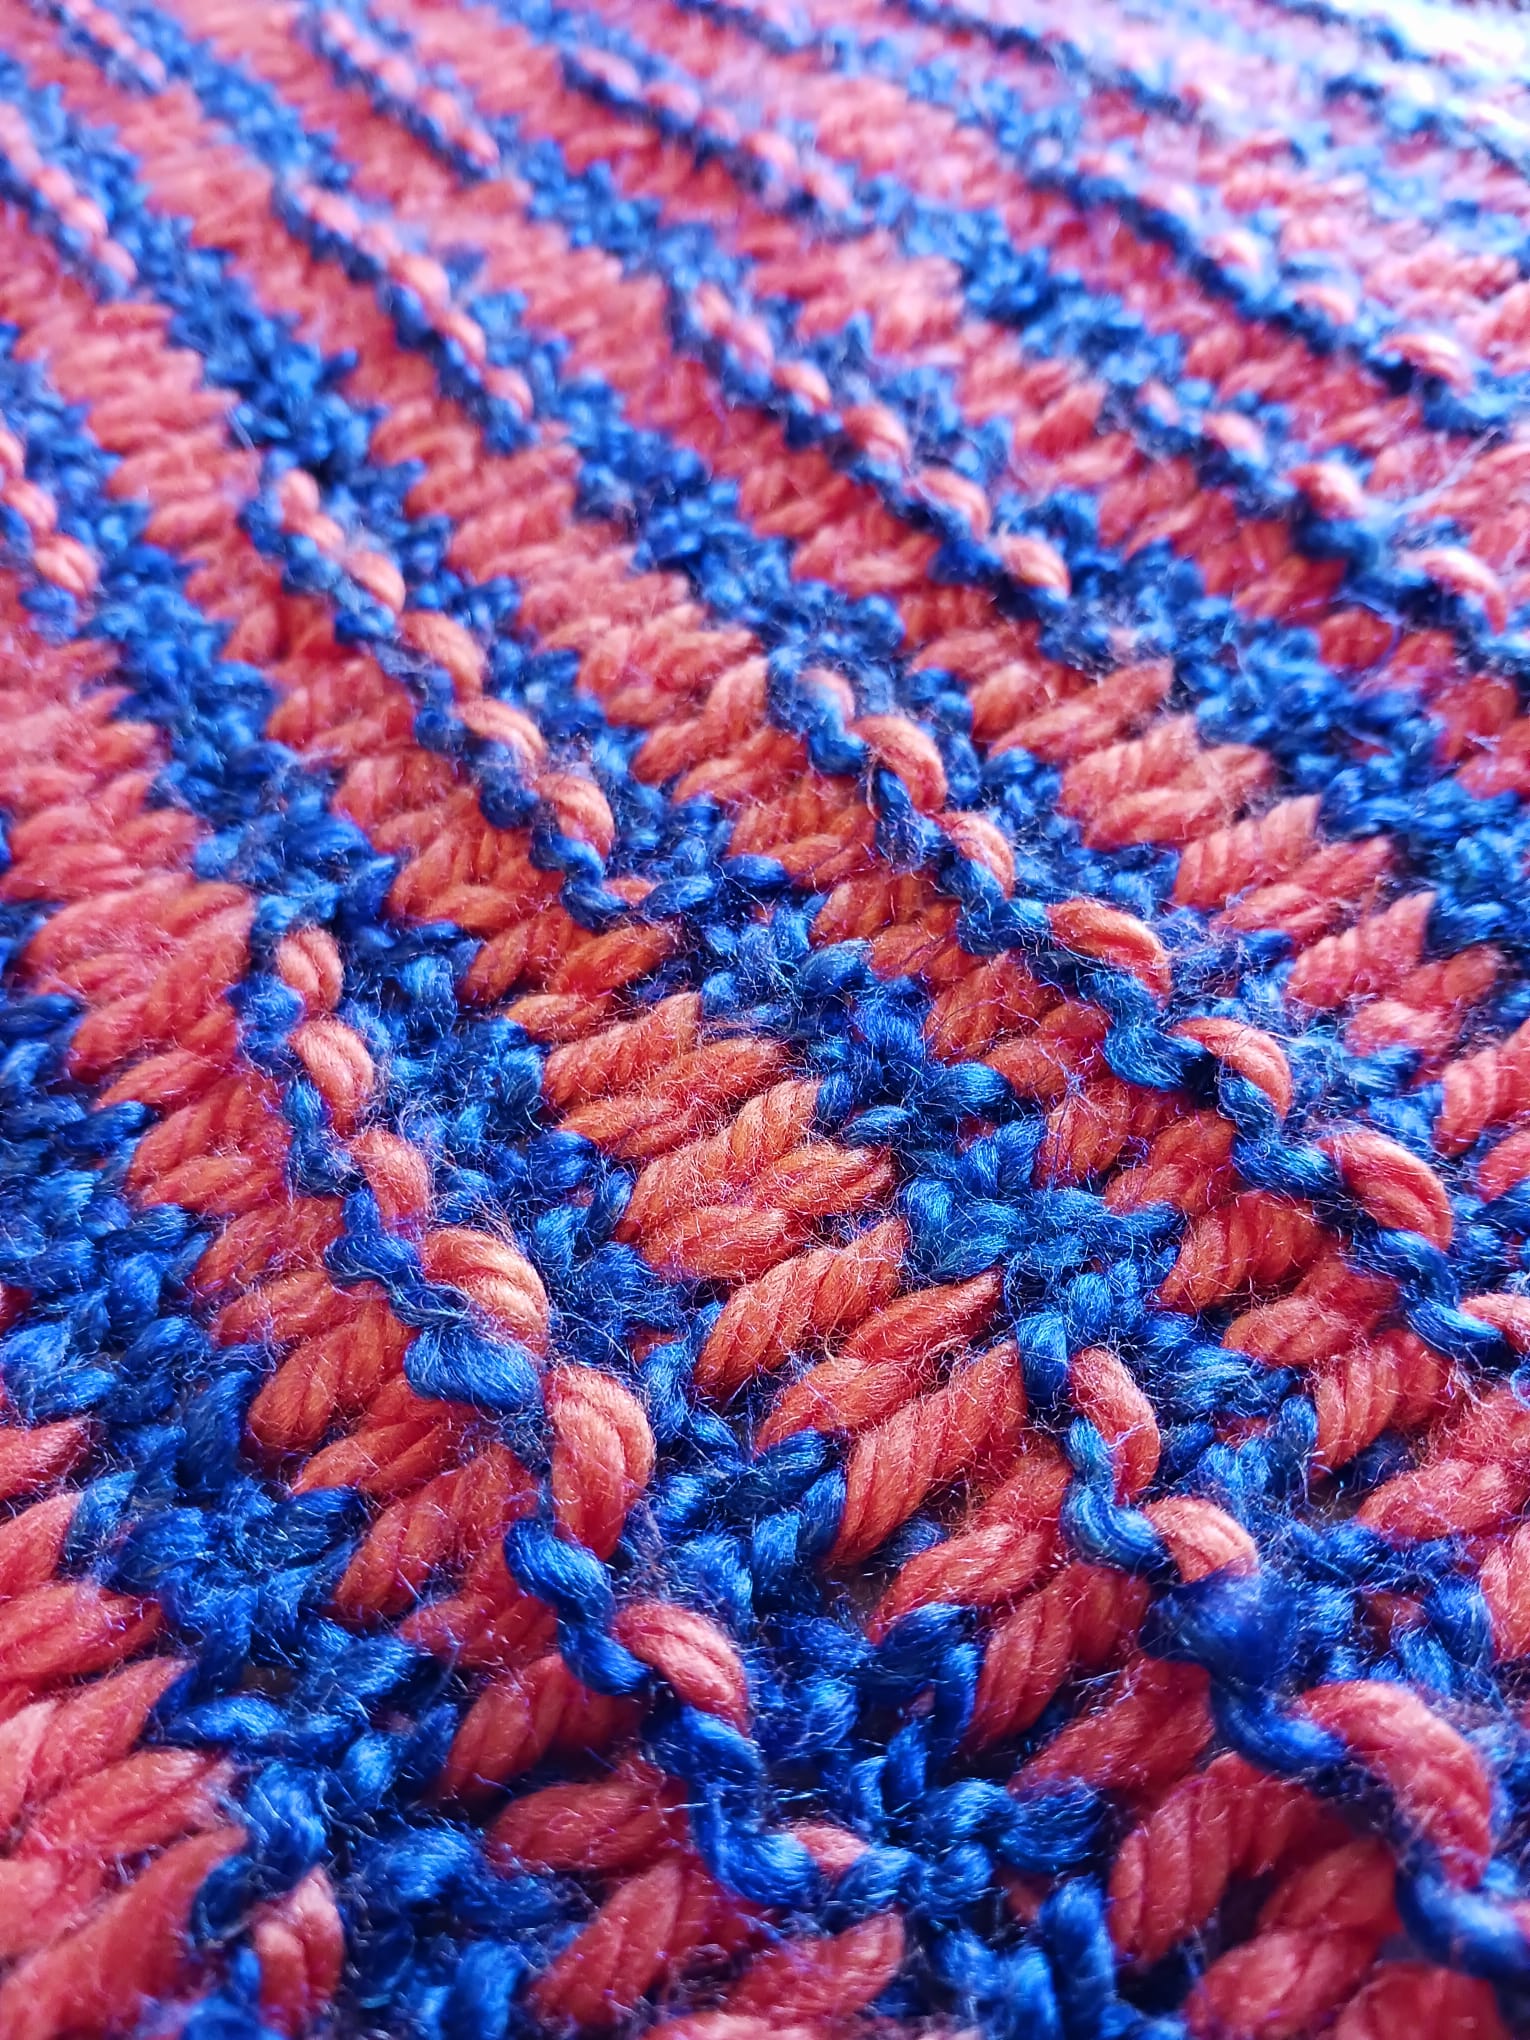 Orange and Blue Knit Blanket at AuntHill.ca